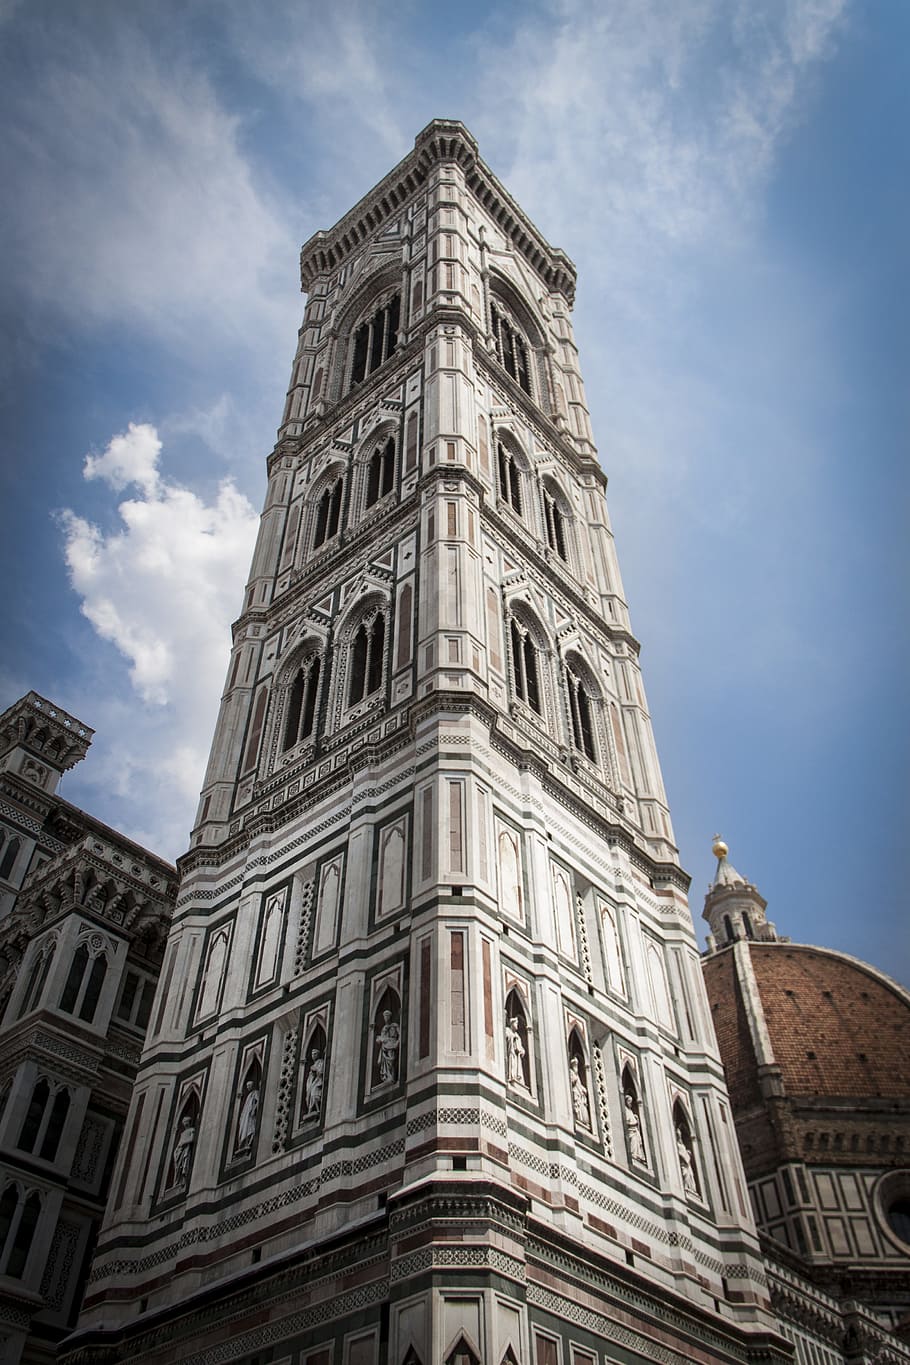 firenze, italy, florence, italian, europe, architecture, tuscany, old, city, building